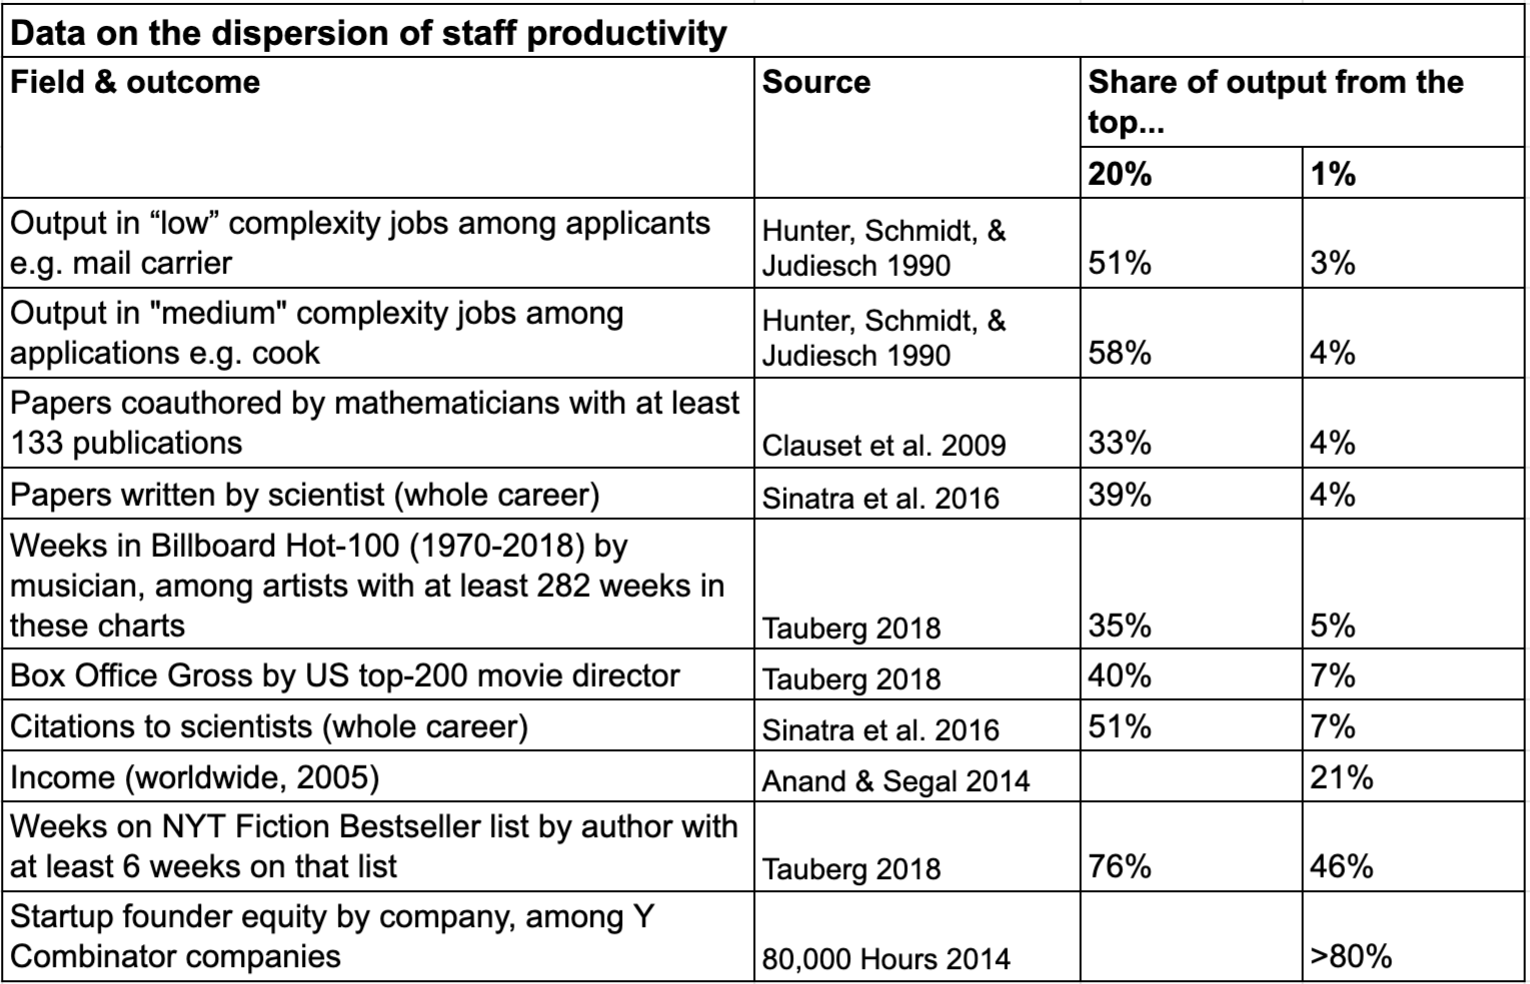 Data on the dispersion of staff productivity